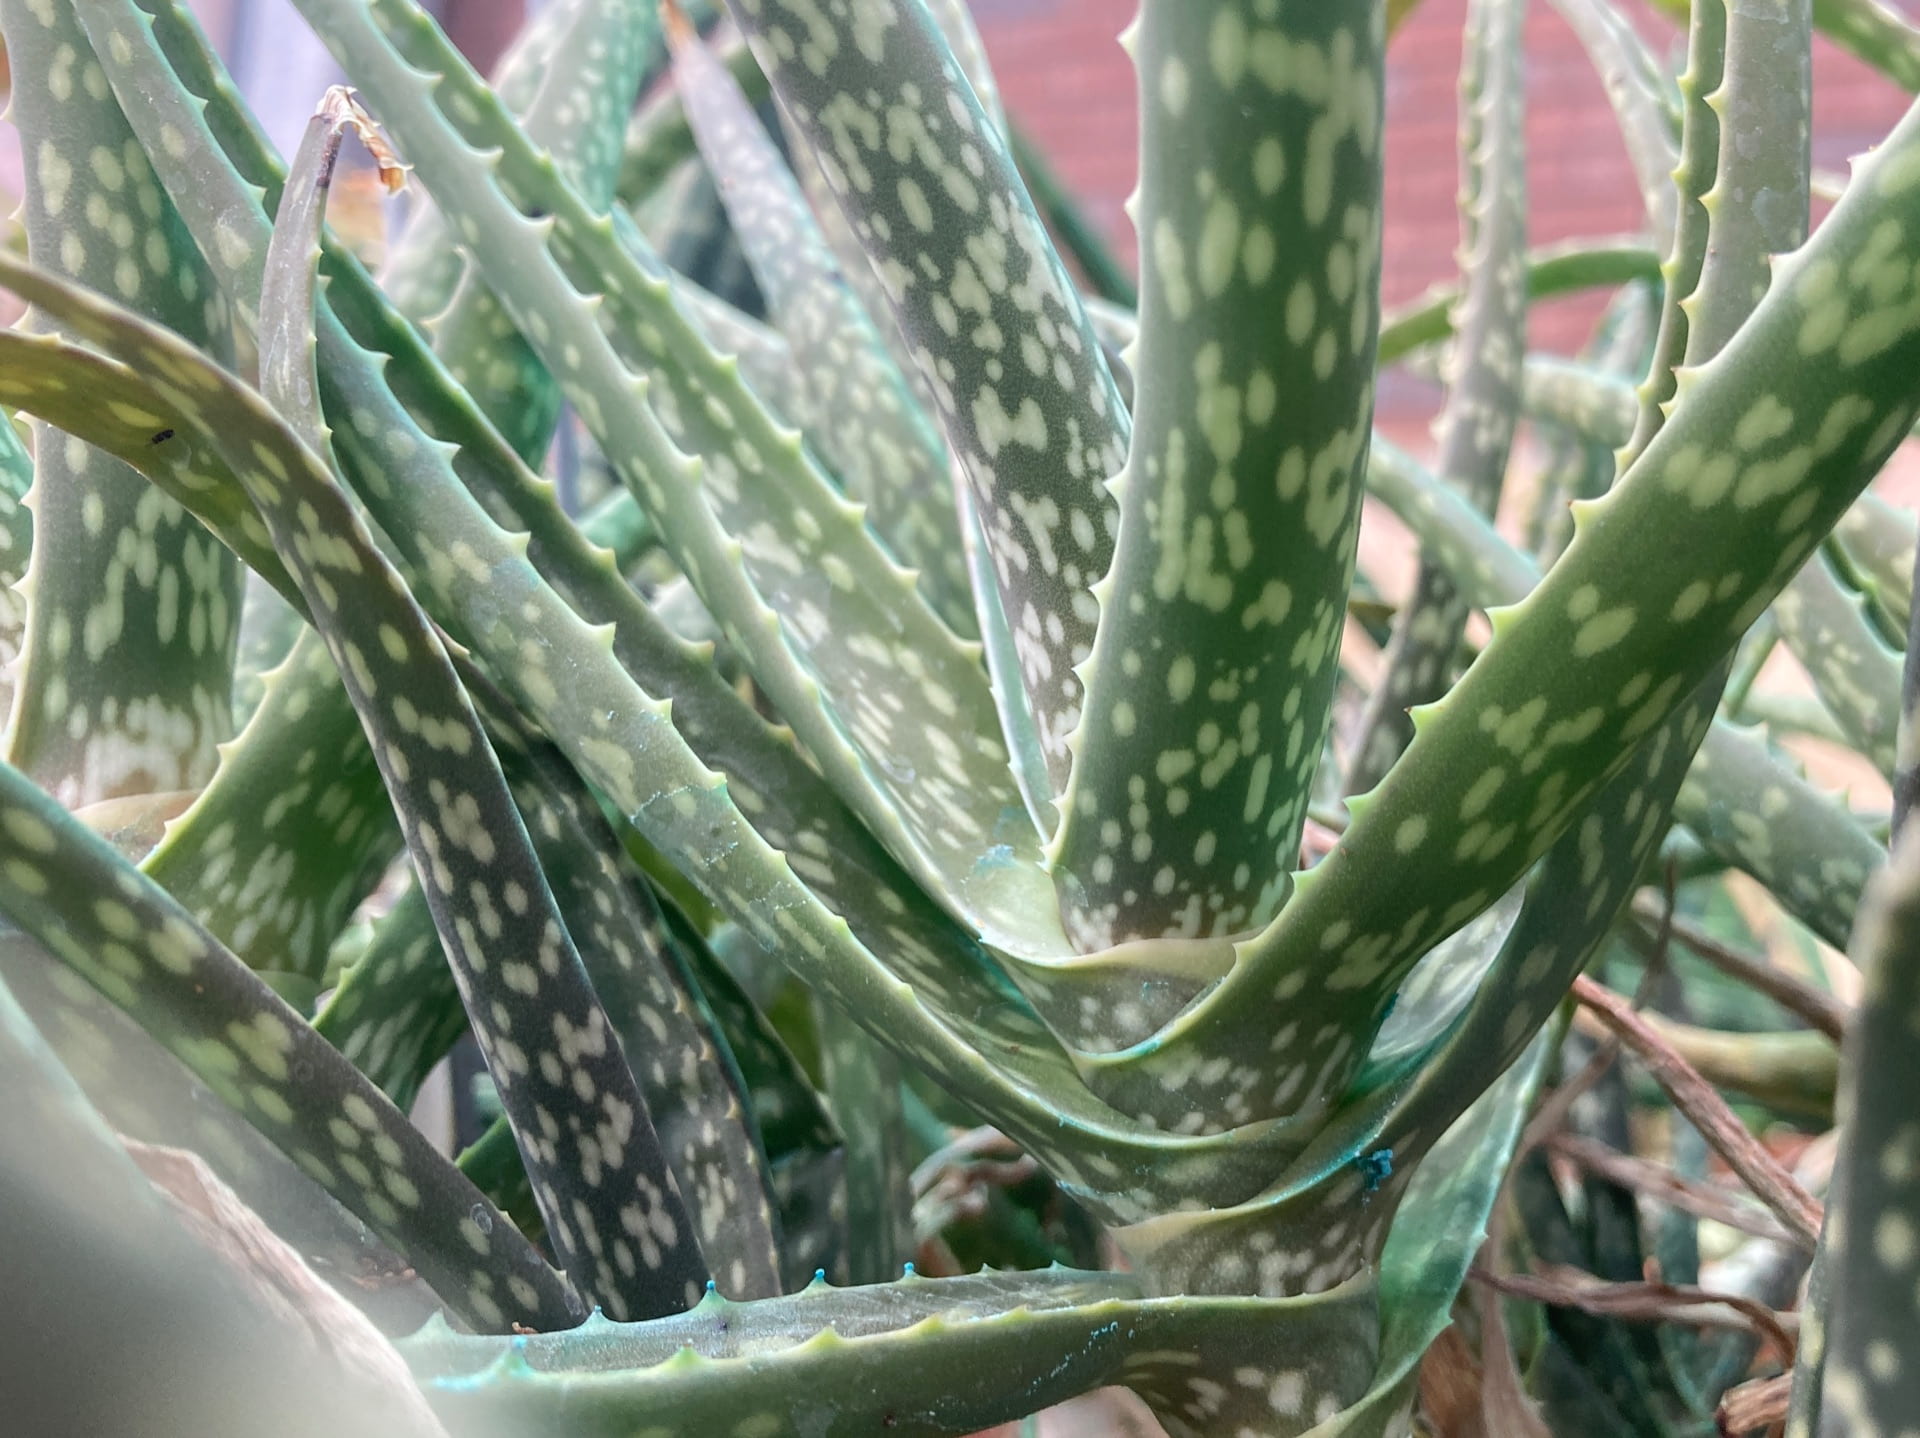 Aloe vera's gelatinous leaves are used medicinally to sooth skin ailments.